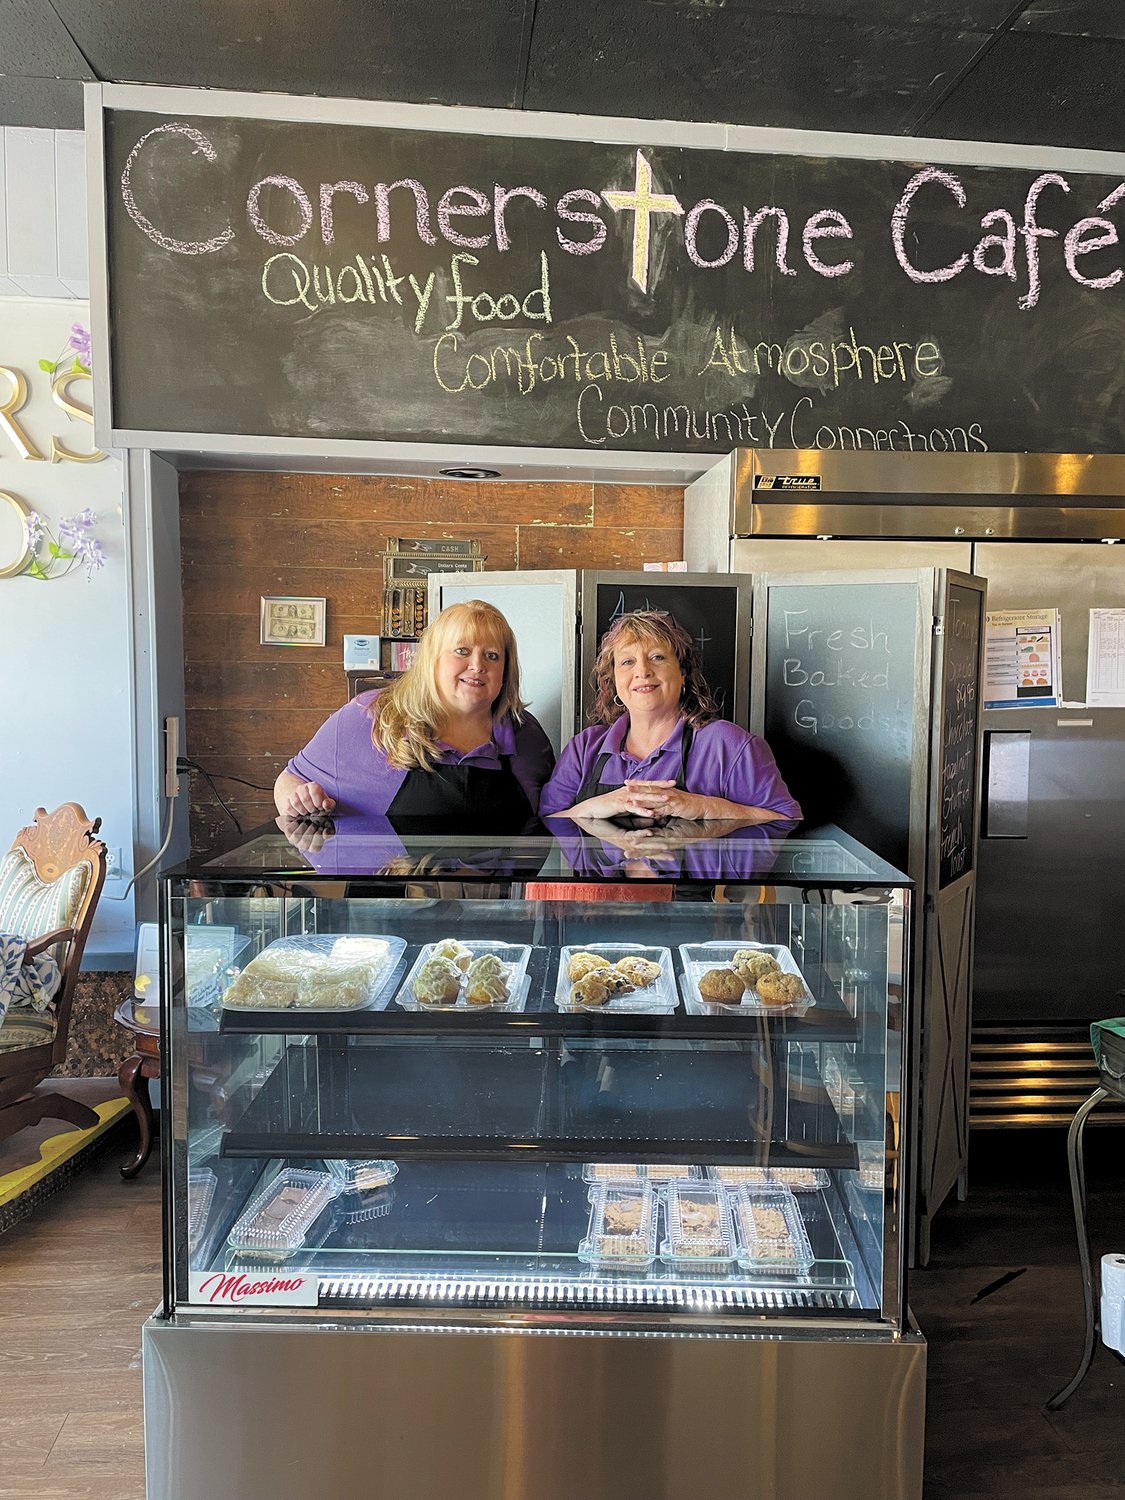 SISTERS LIVING THEIR DREAMS: Amy Thomas and Melissa Taveli opened Cornerstone Cafe on Rolfe Street bringing their love of family, food and community to Cranston.